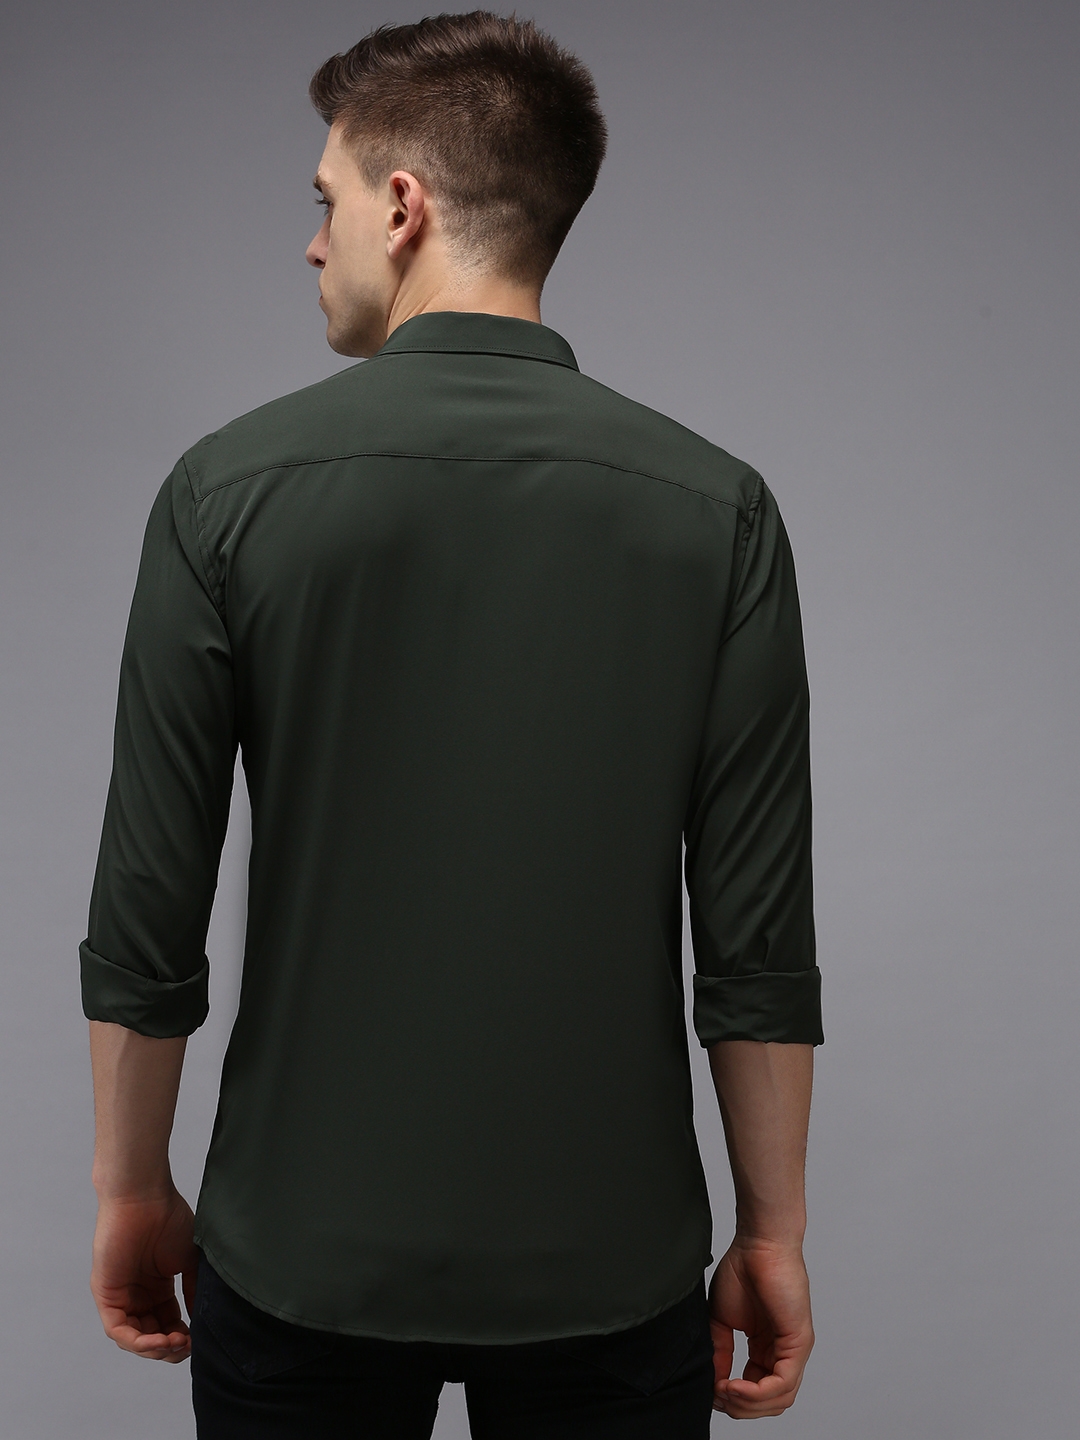 Men's Green Polyester Solid Casual Shirts